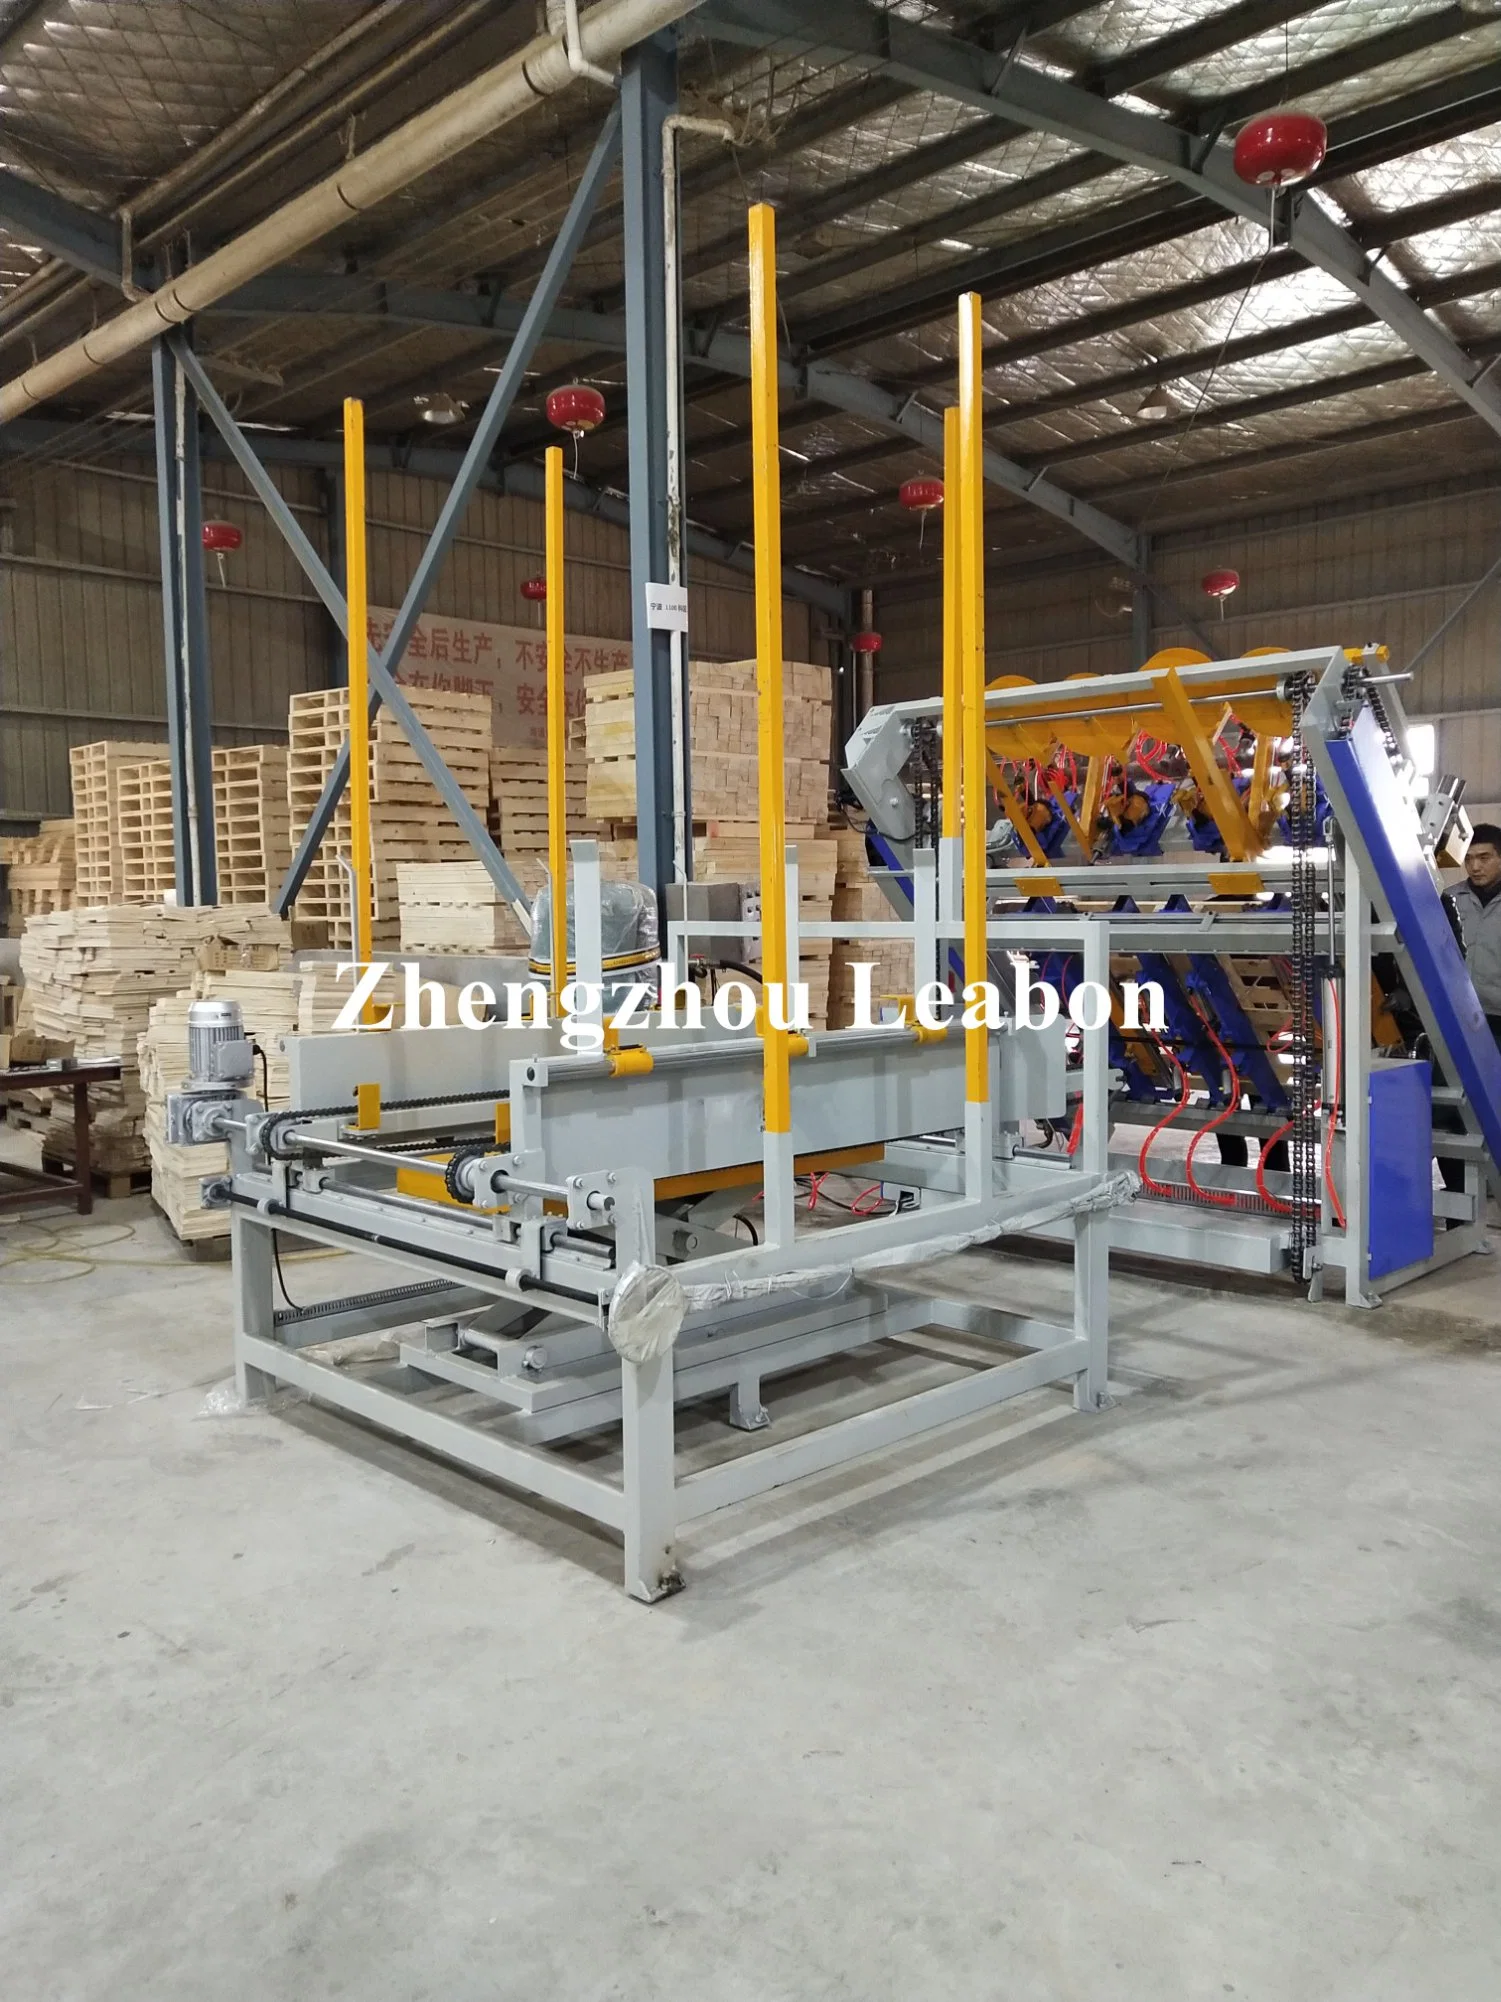 CE Approved Euro Block Wood Pallet Making Machine Automatic Production Line